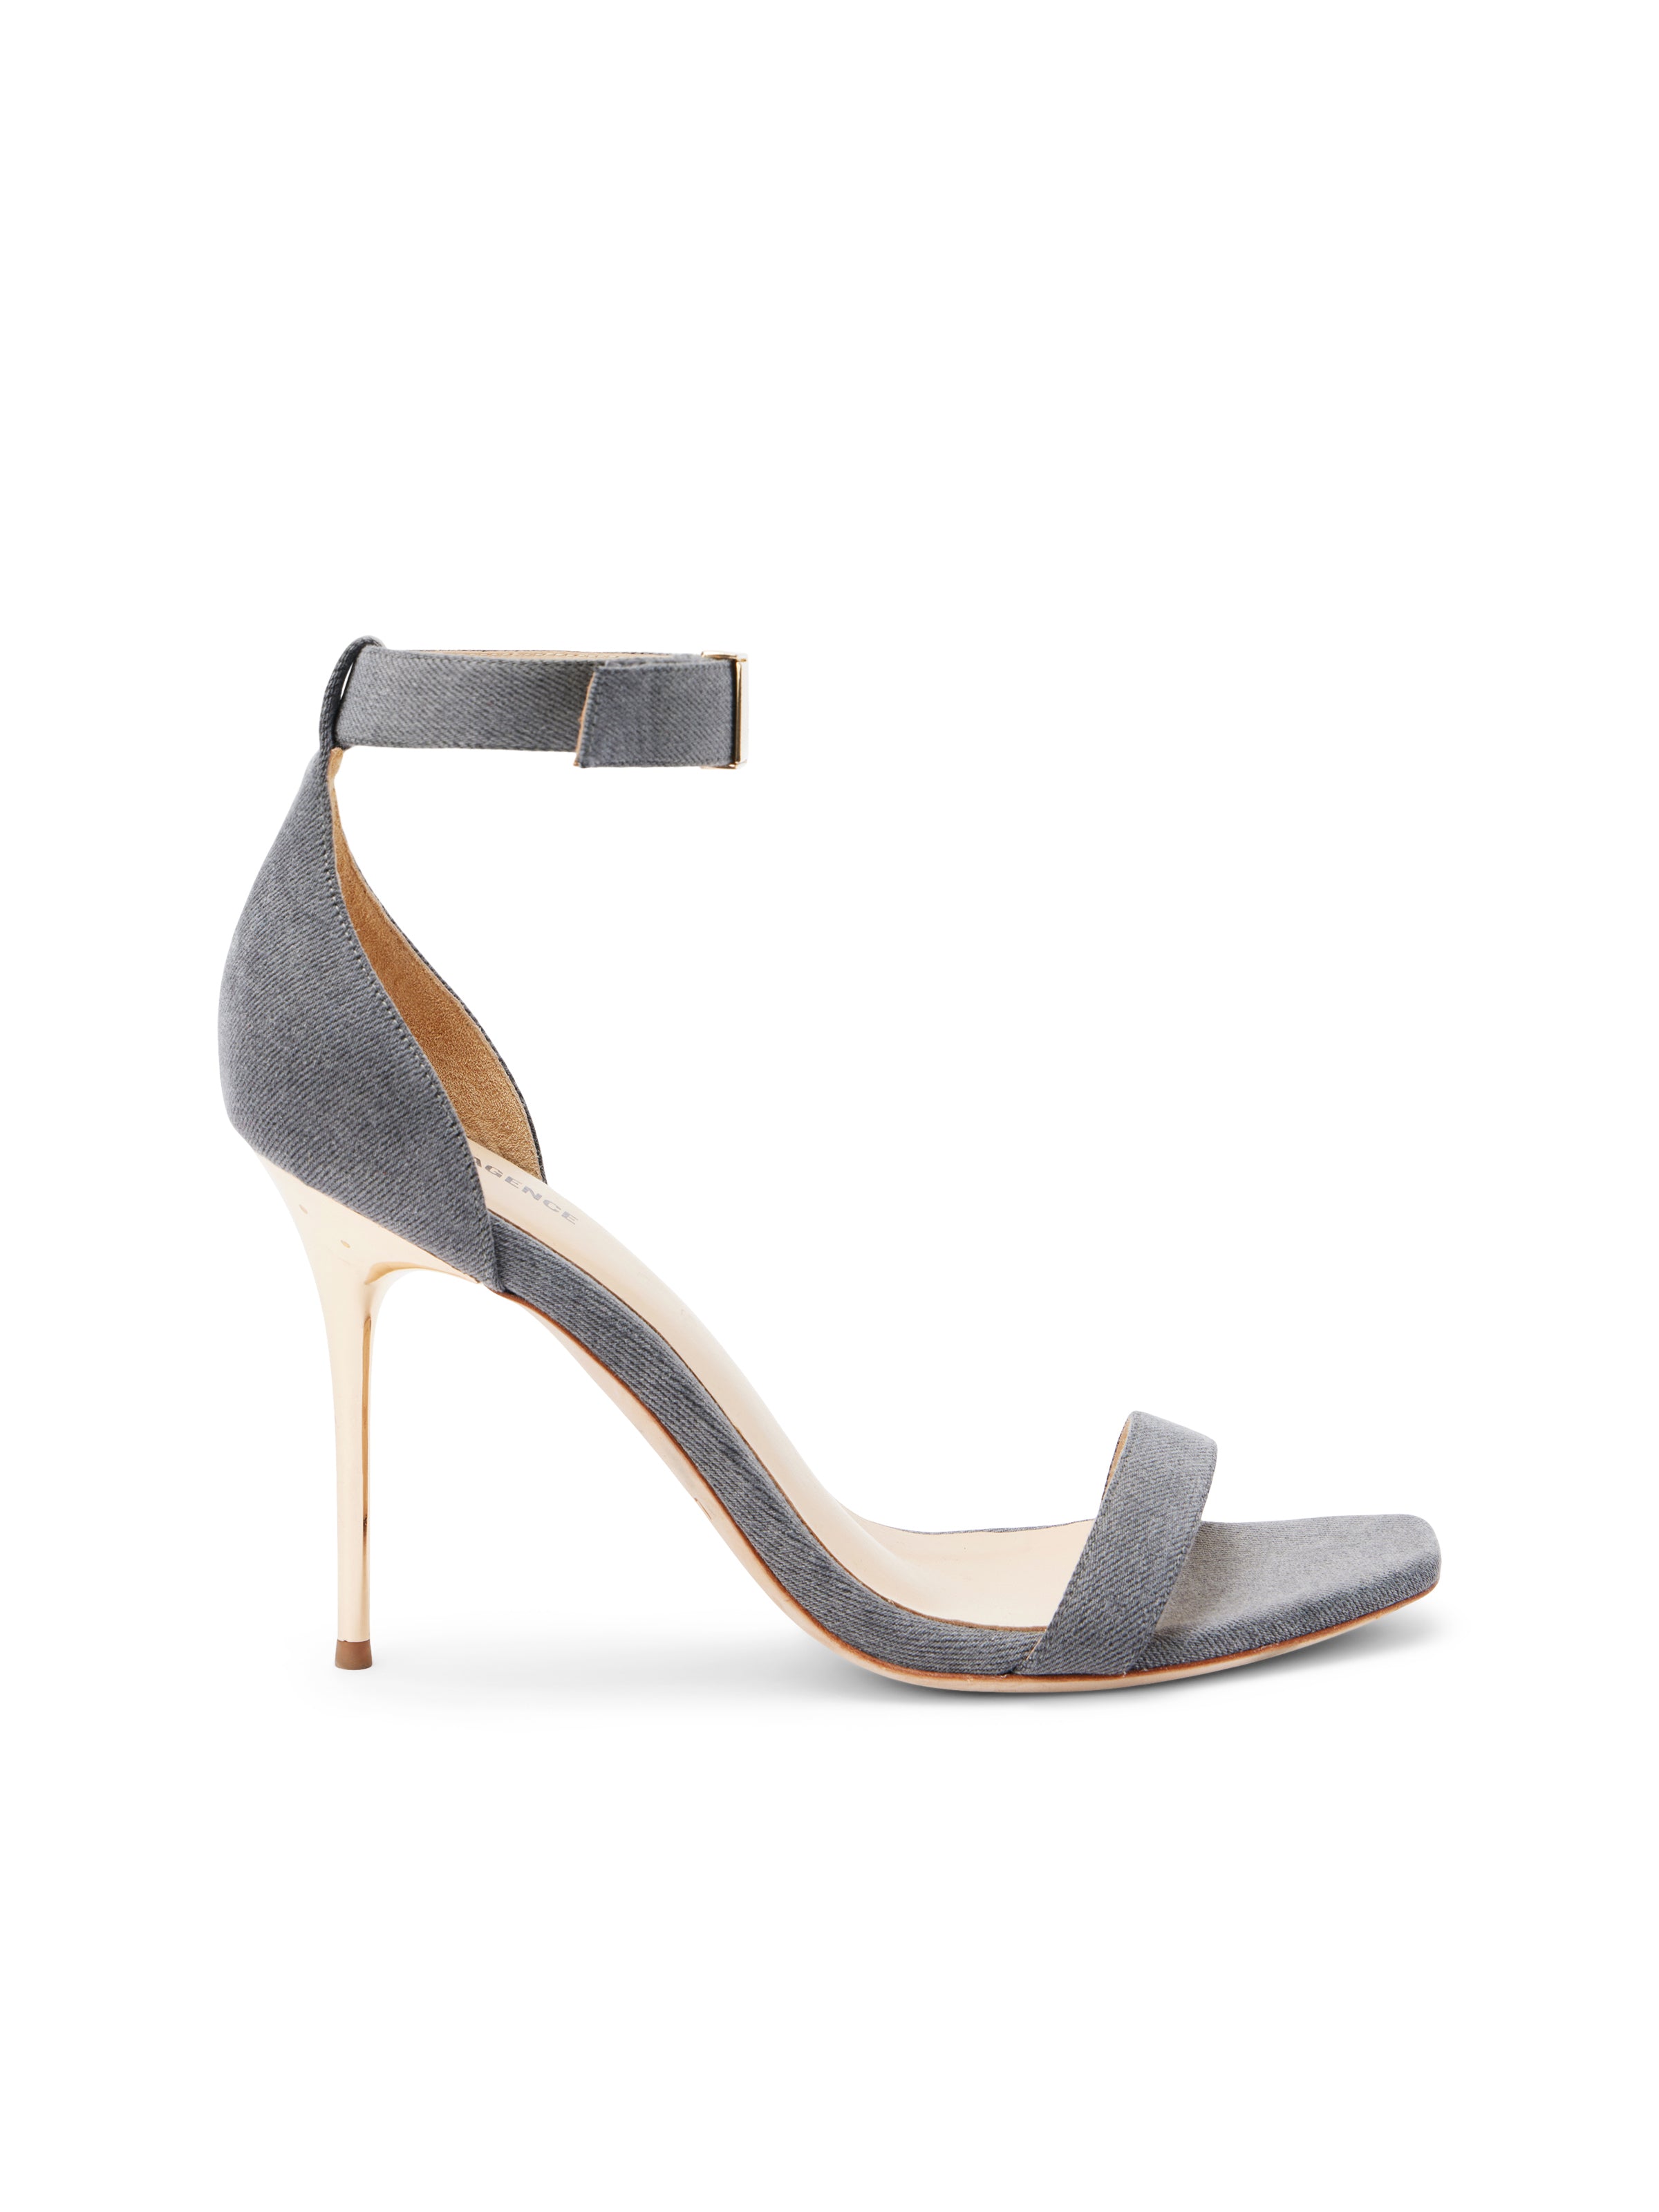 Featured: Thea Sandal